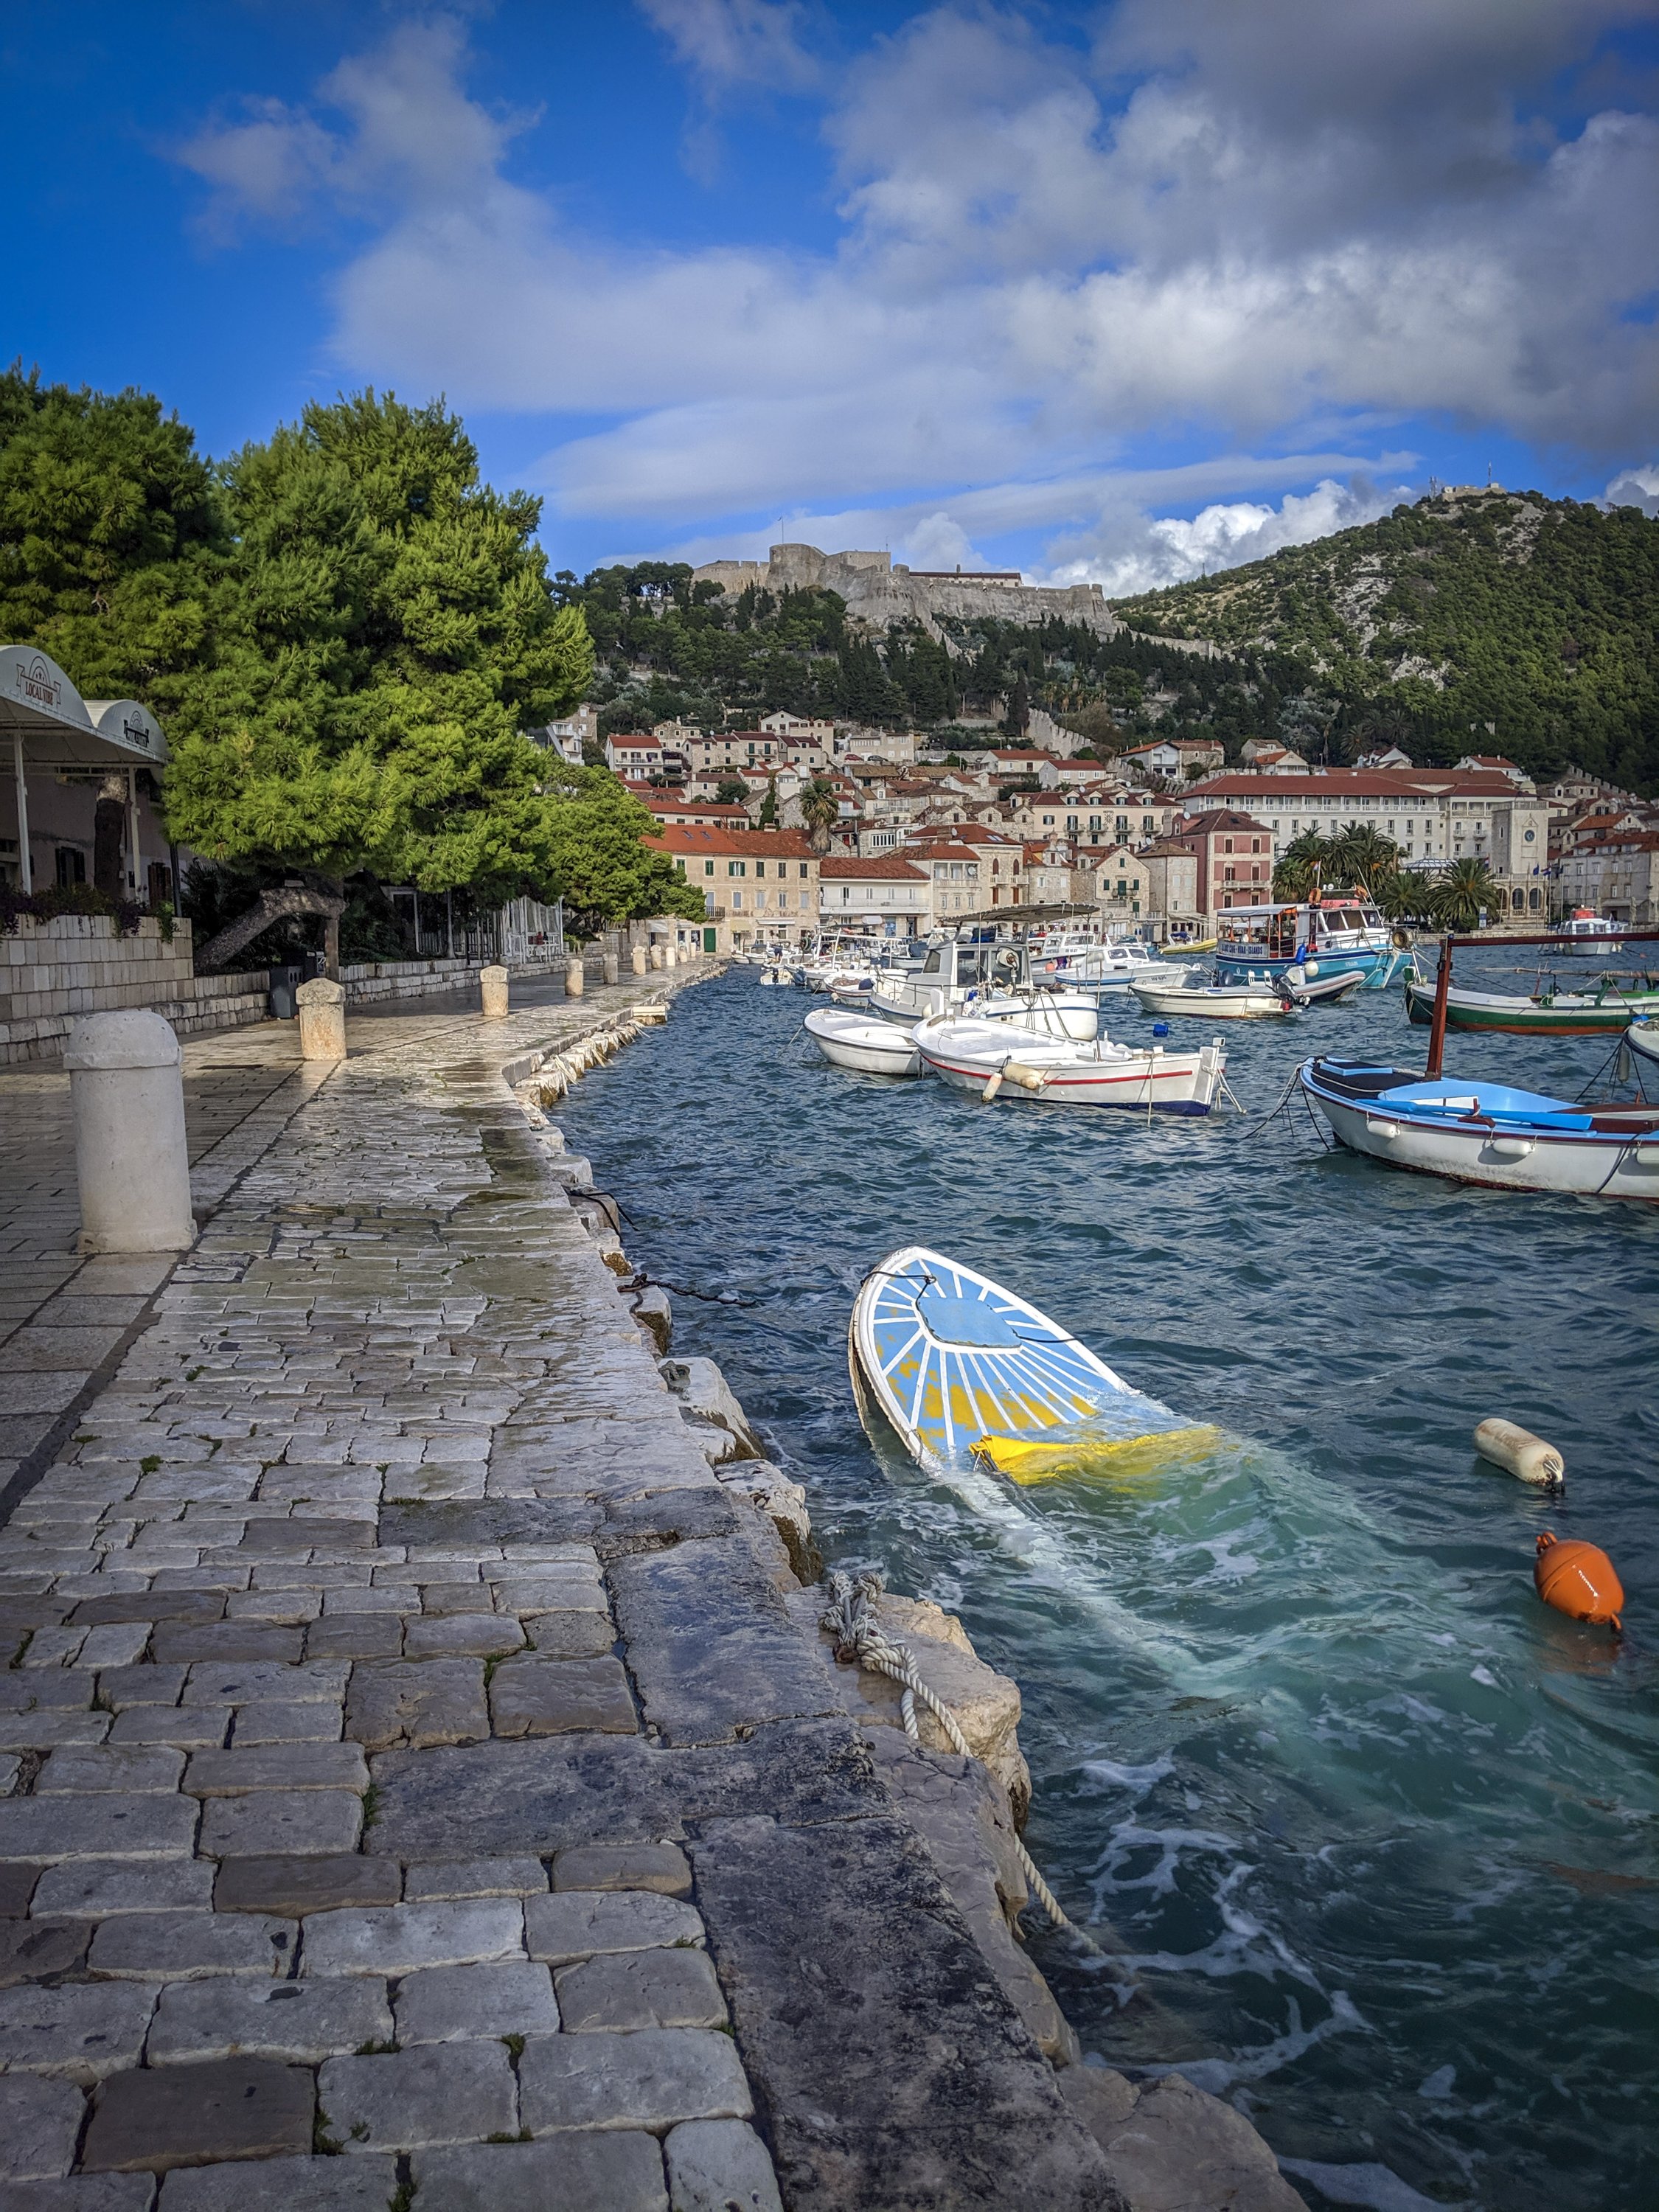 Hvar in the off season: Riding out a Historic Storm